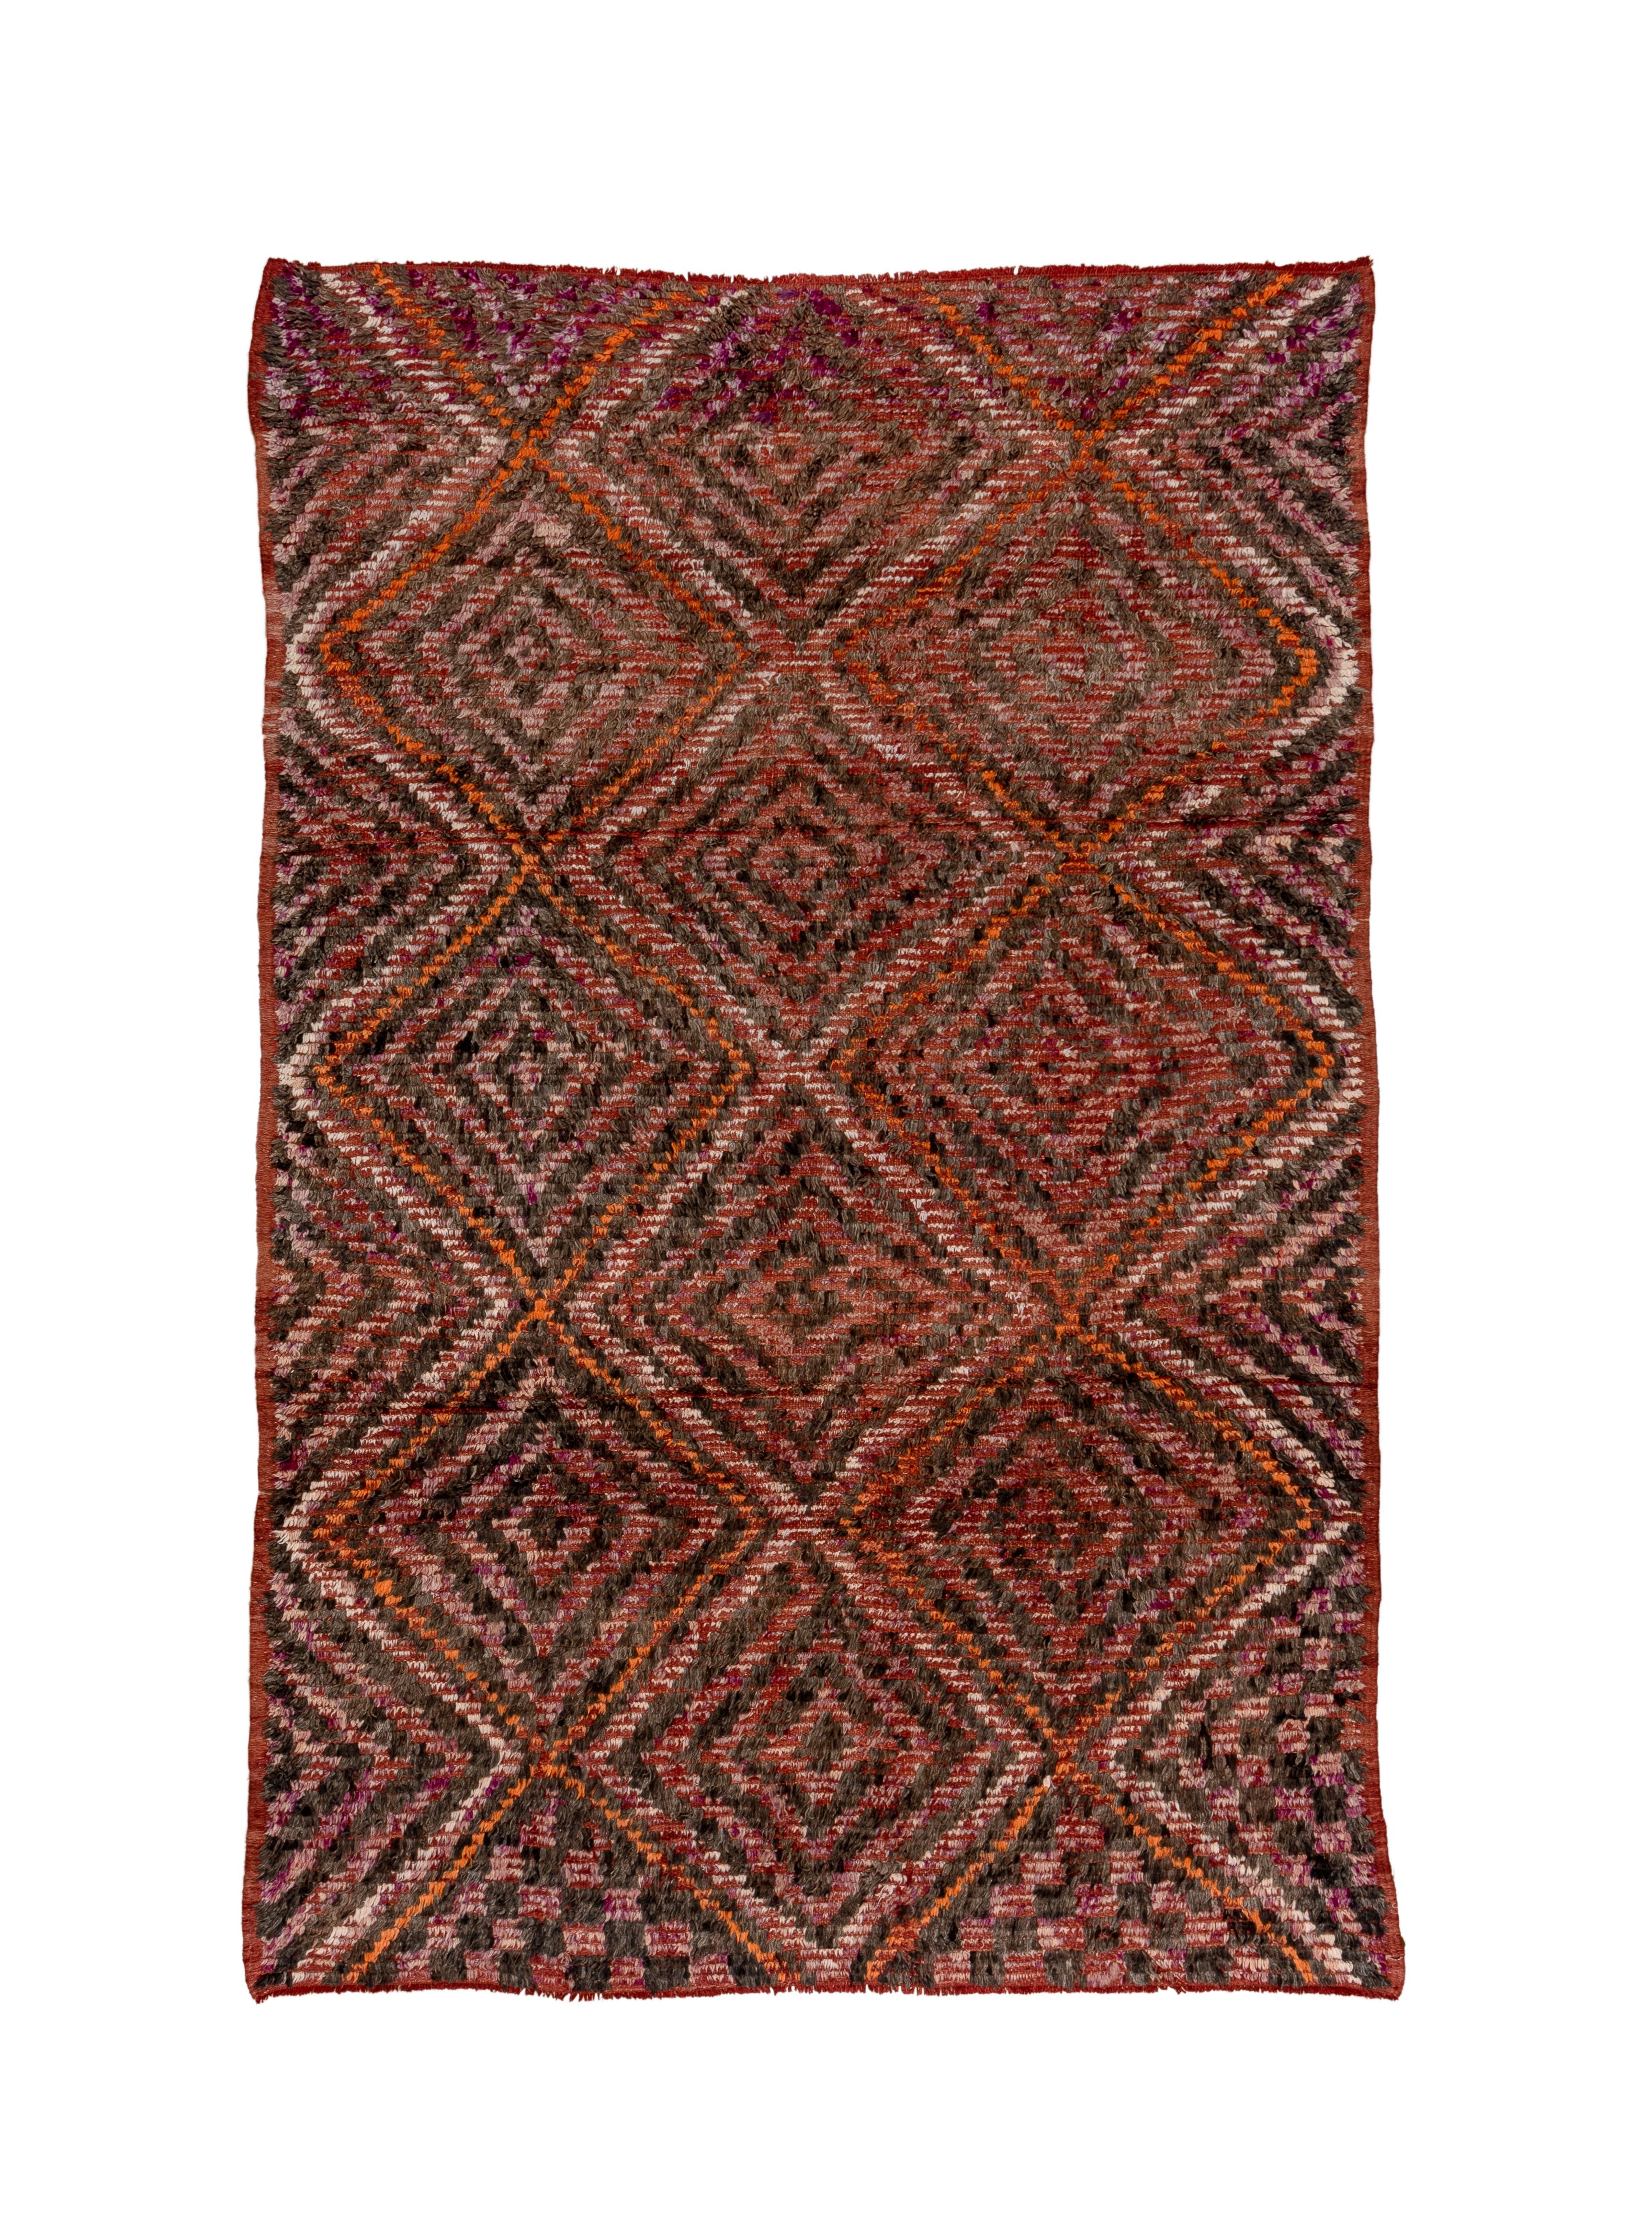 Modern, handwoven contemporary wool rug

Rug Measures
7'5x11'2.